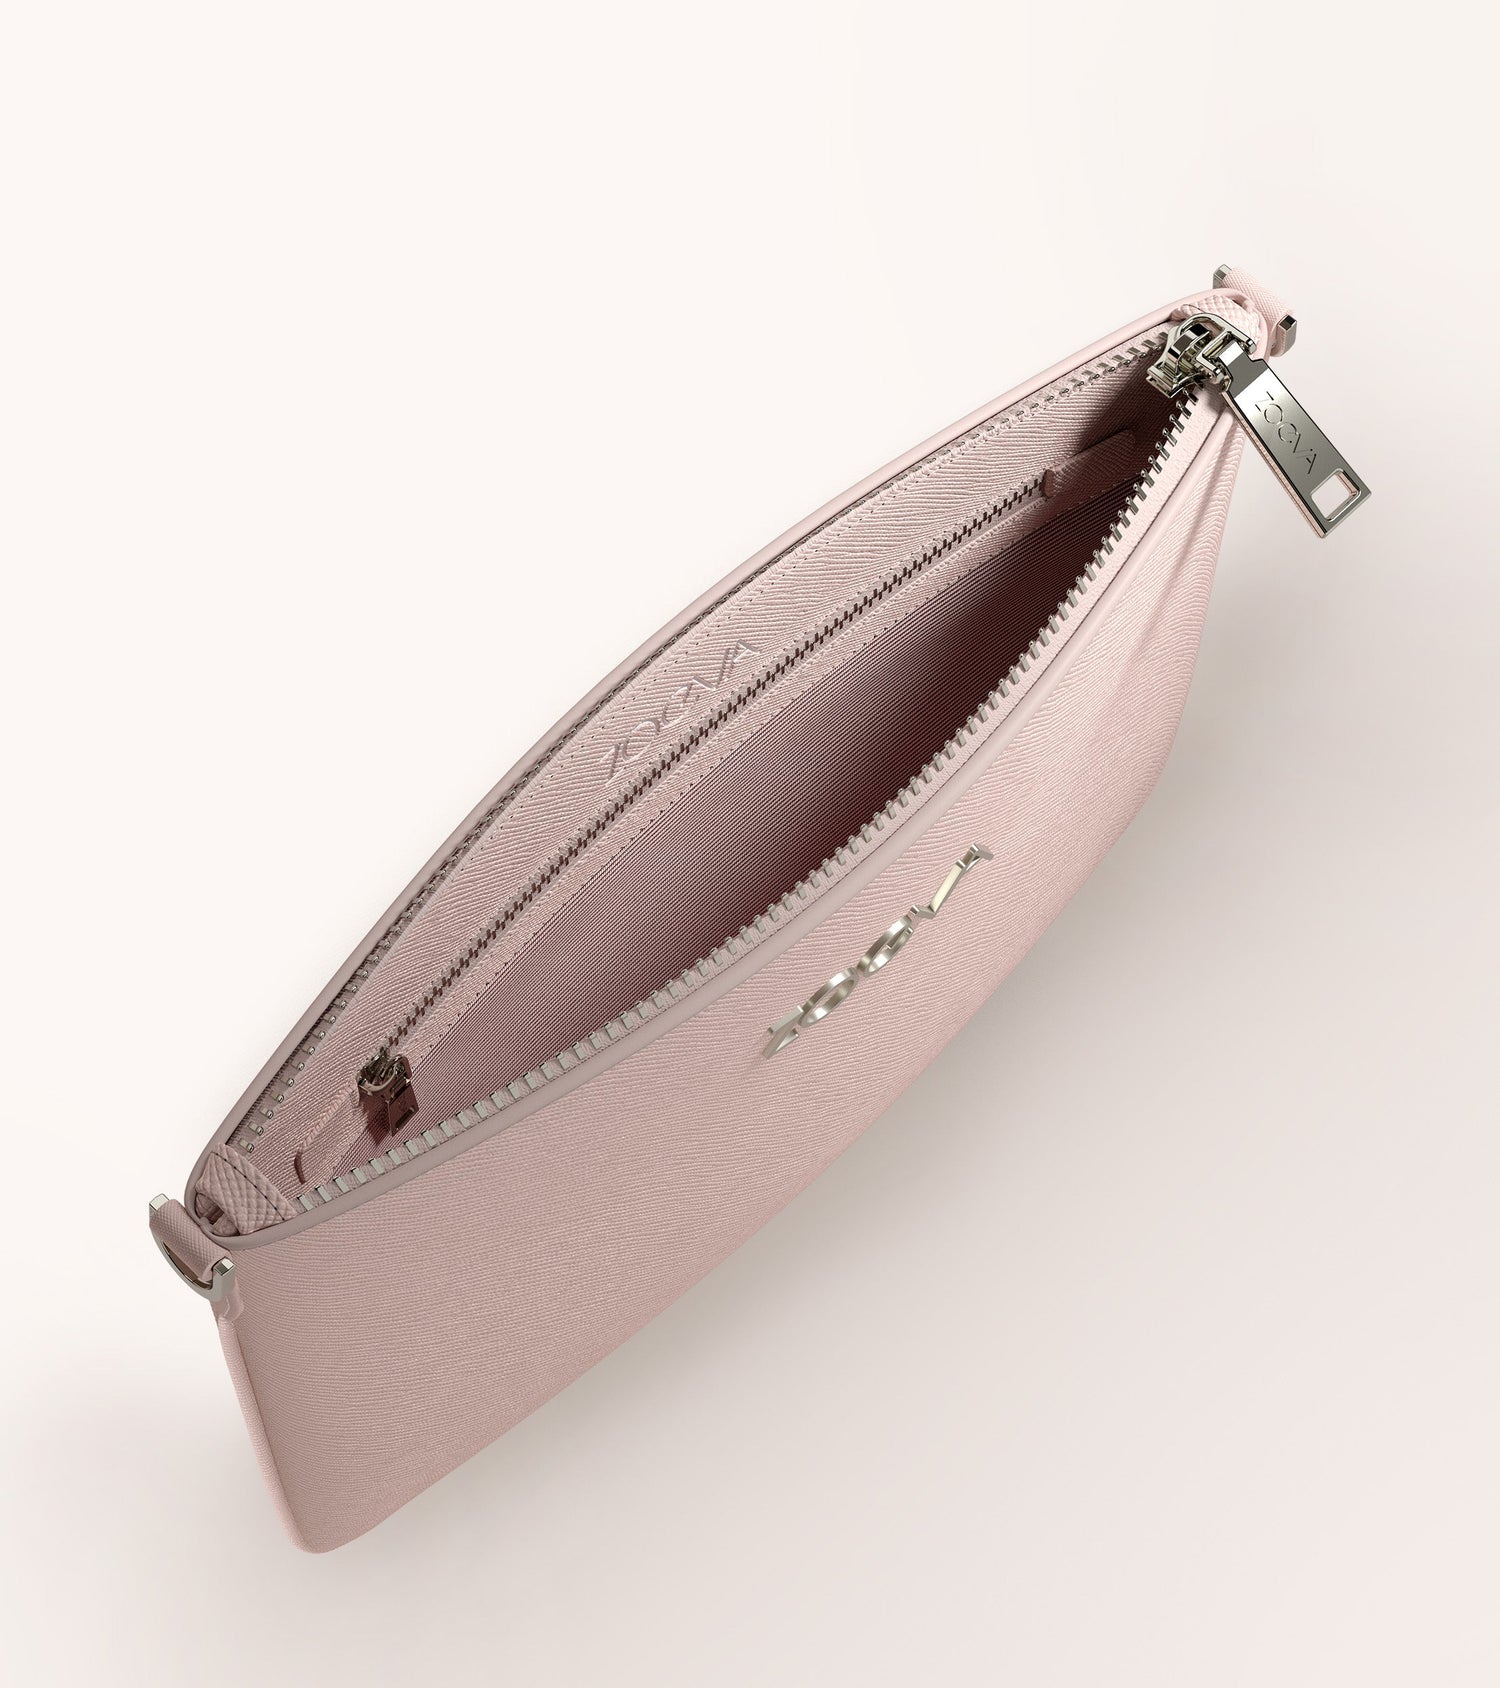 The Everyday Clutch & Shoulder Strap (Dusty Rose/Bordeaux) Main Image featured